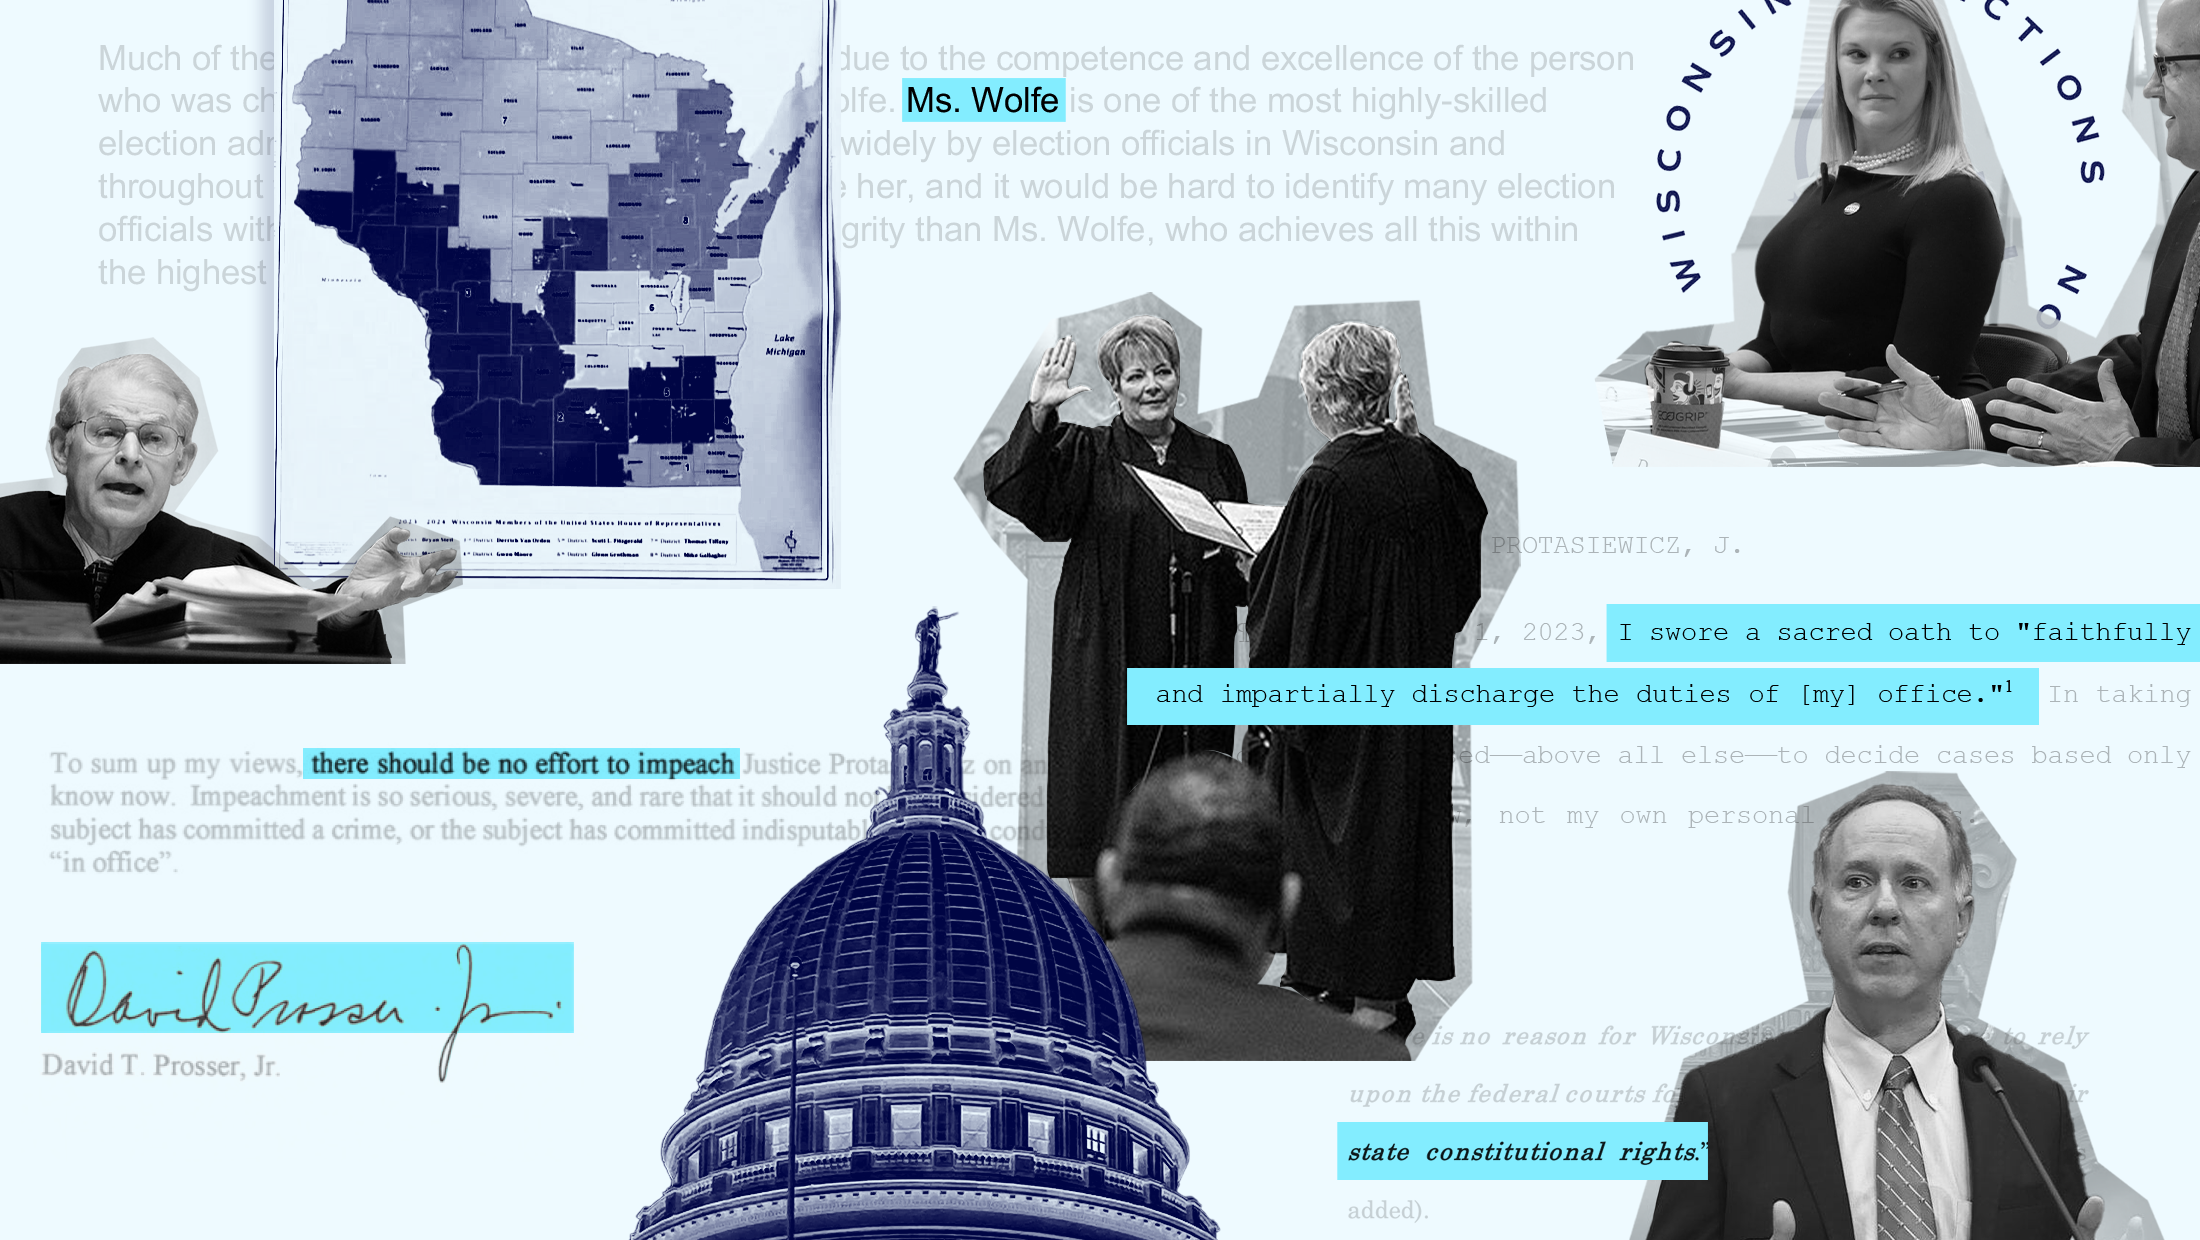 It's a dramatic graphic with multiple grey-toned people on it - Justice Janet getting sworn in, Speaker of Assembly Robin Vos, former SCOWIS Justice David Prosser and Meagan Wolfe. The state's legislative map and capitol building dome are also featured in dark blue tones